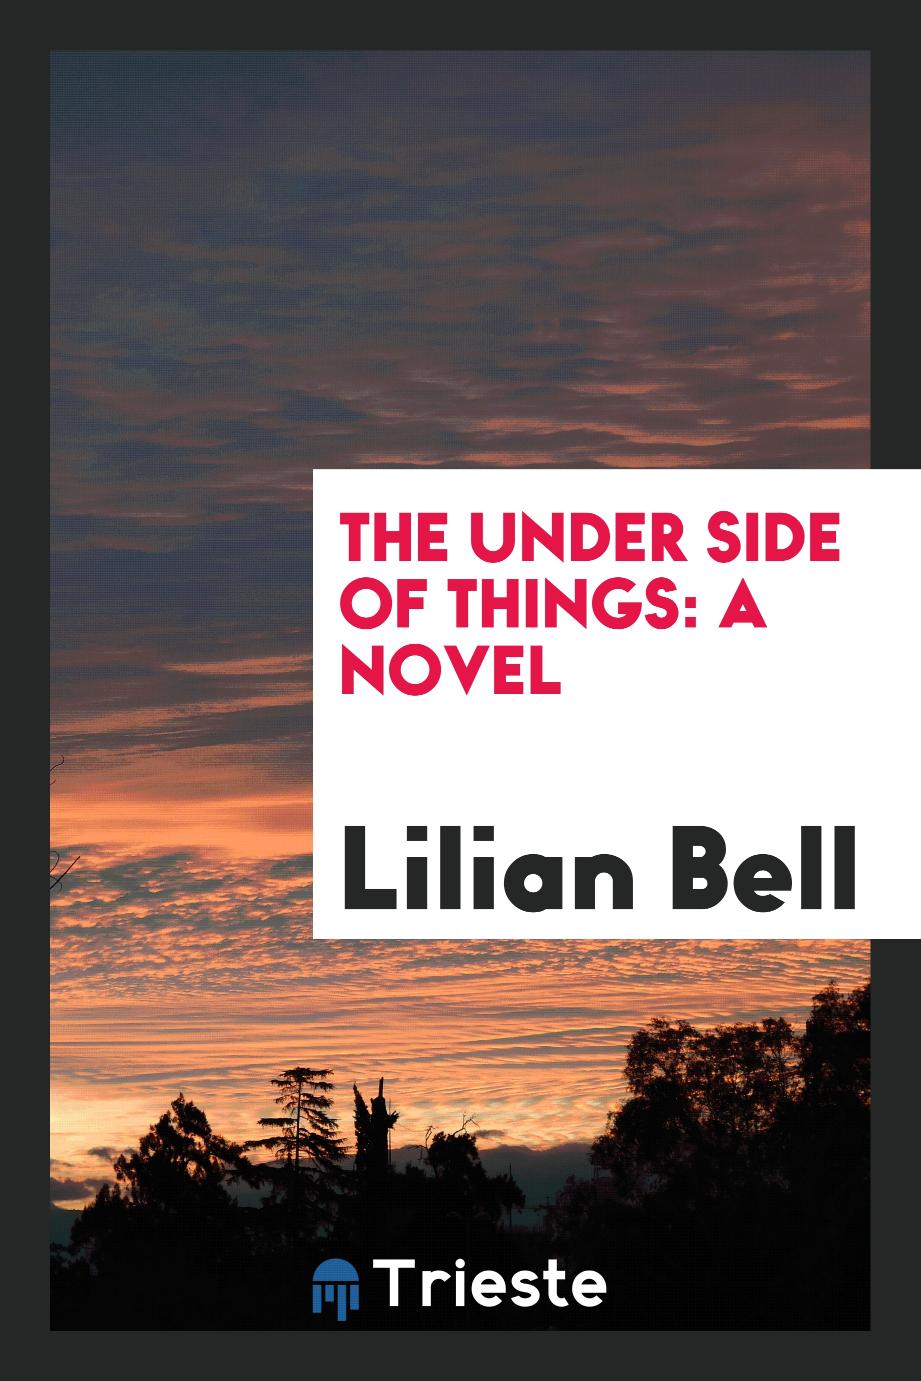 The under side of things: a novel